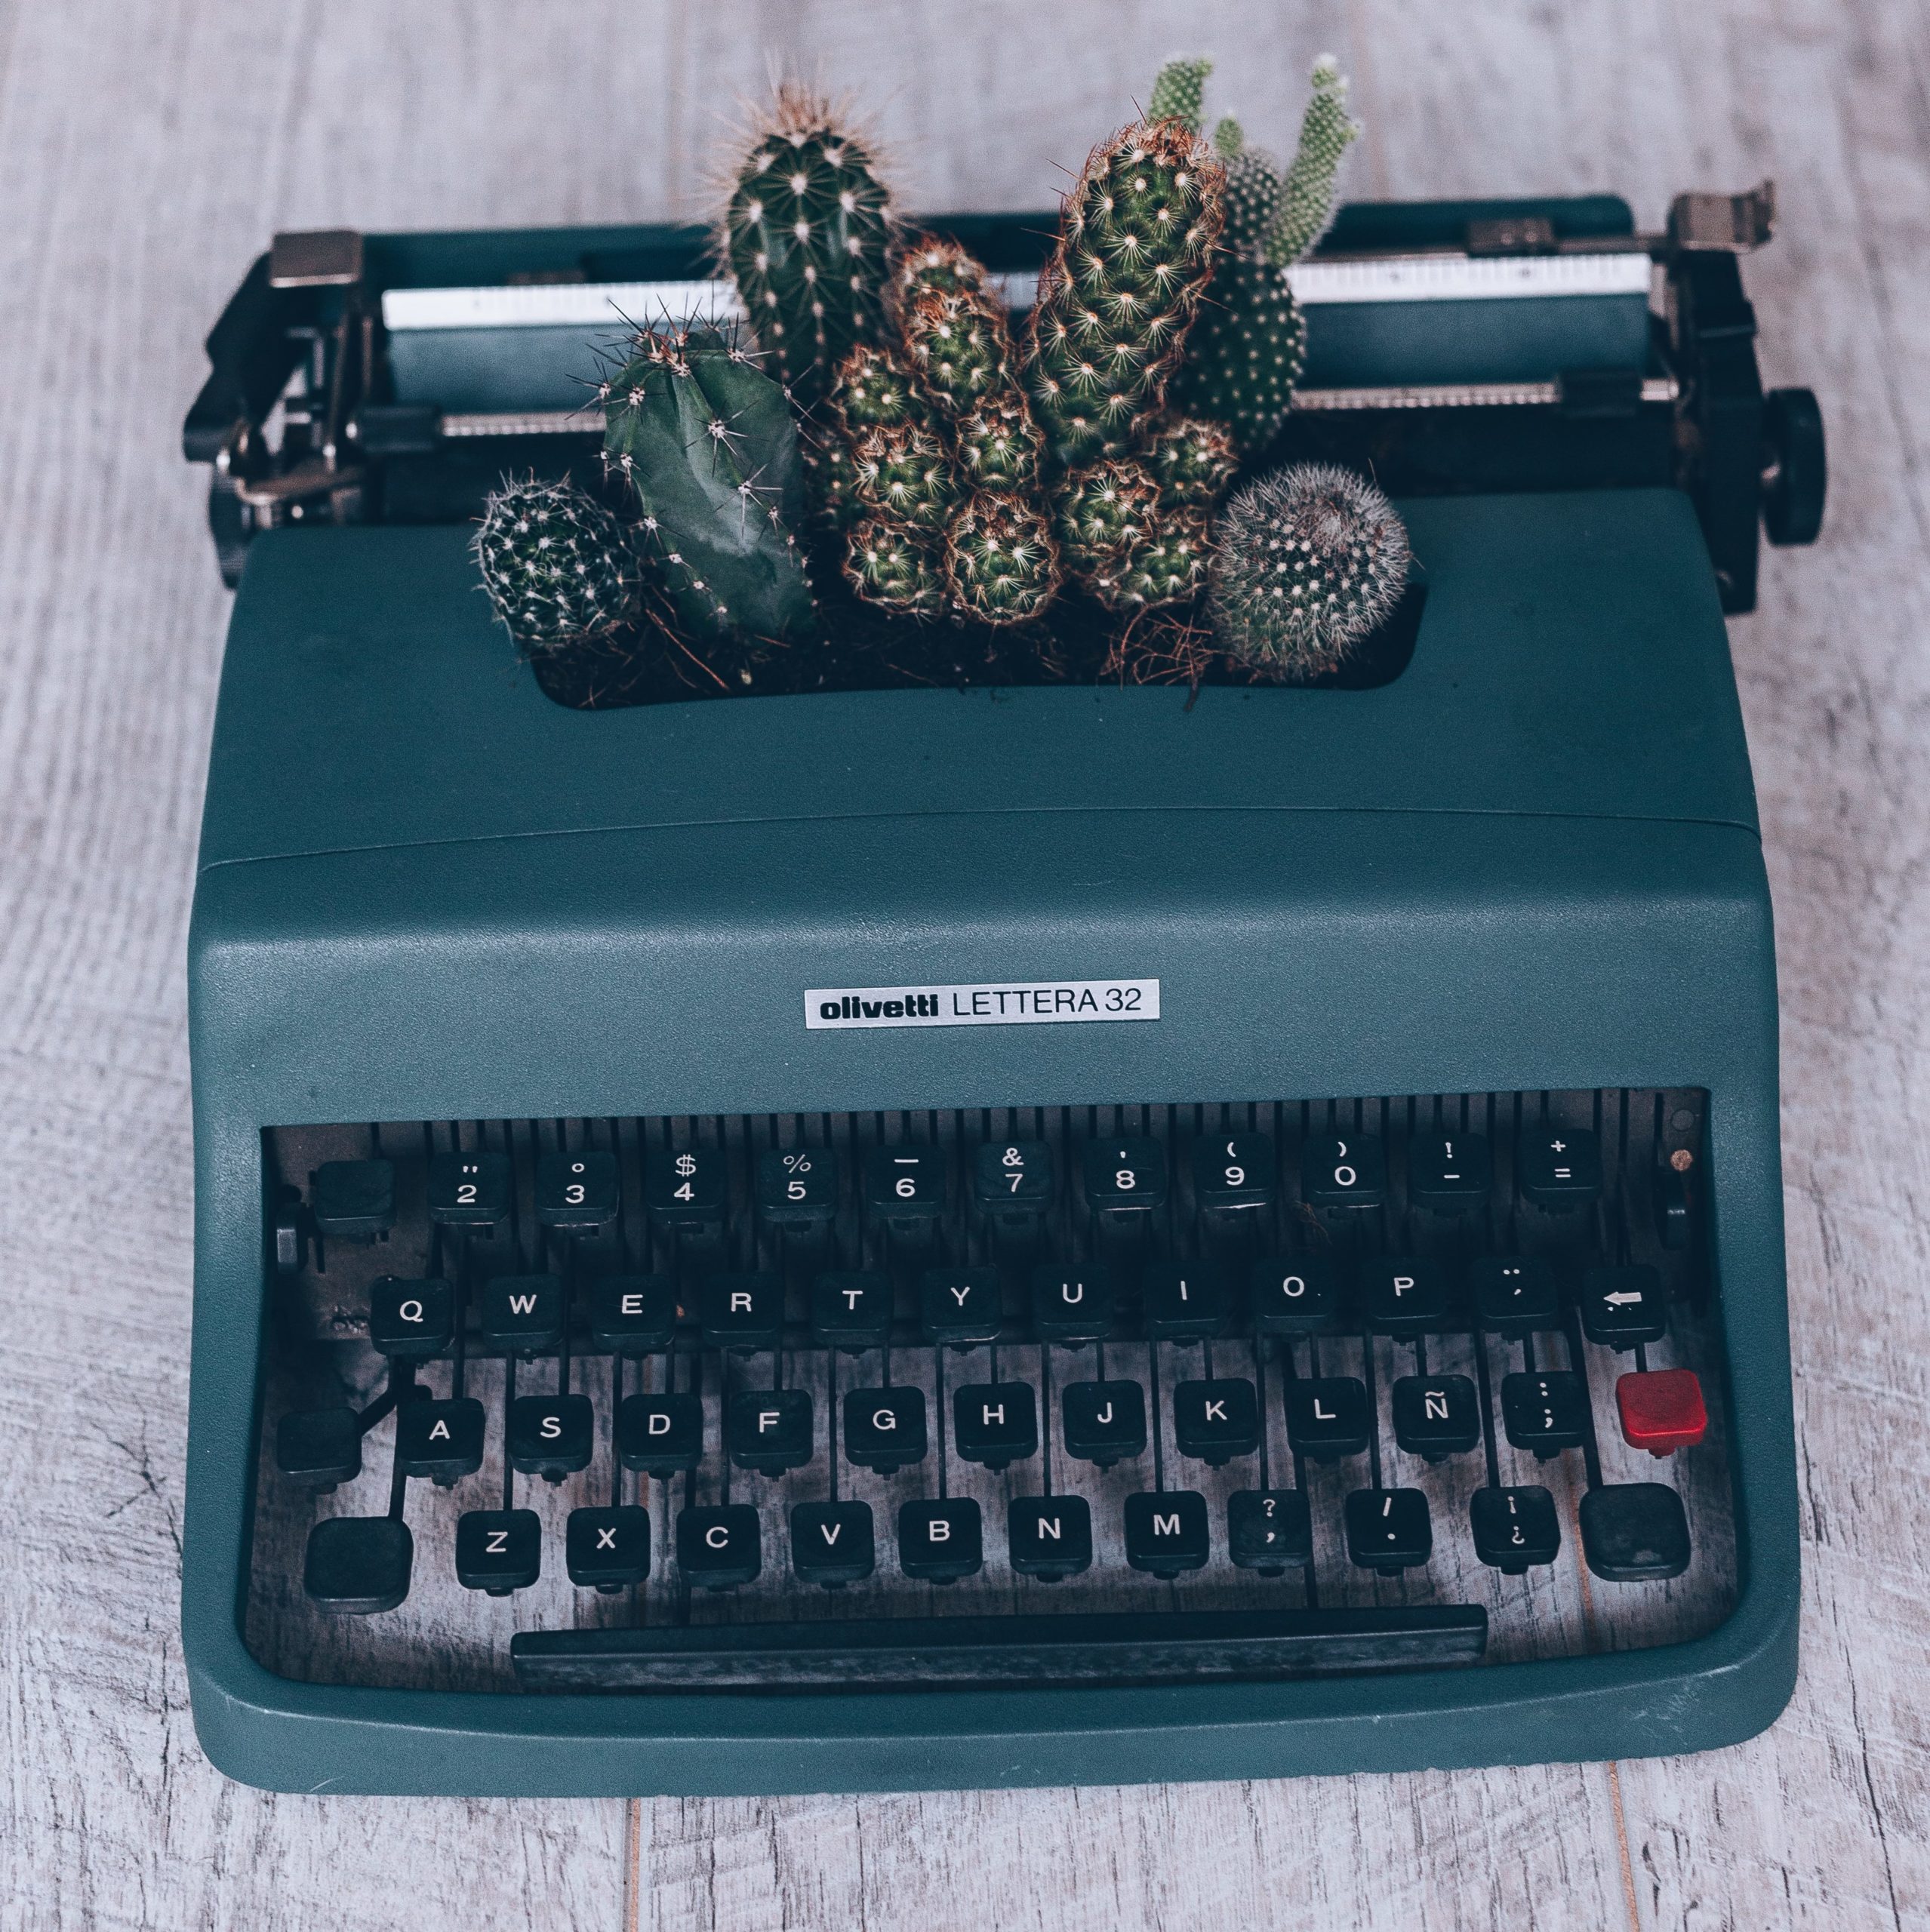 Type writer with small cacti growing out of it.